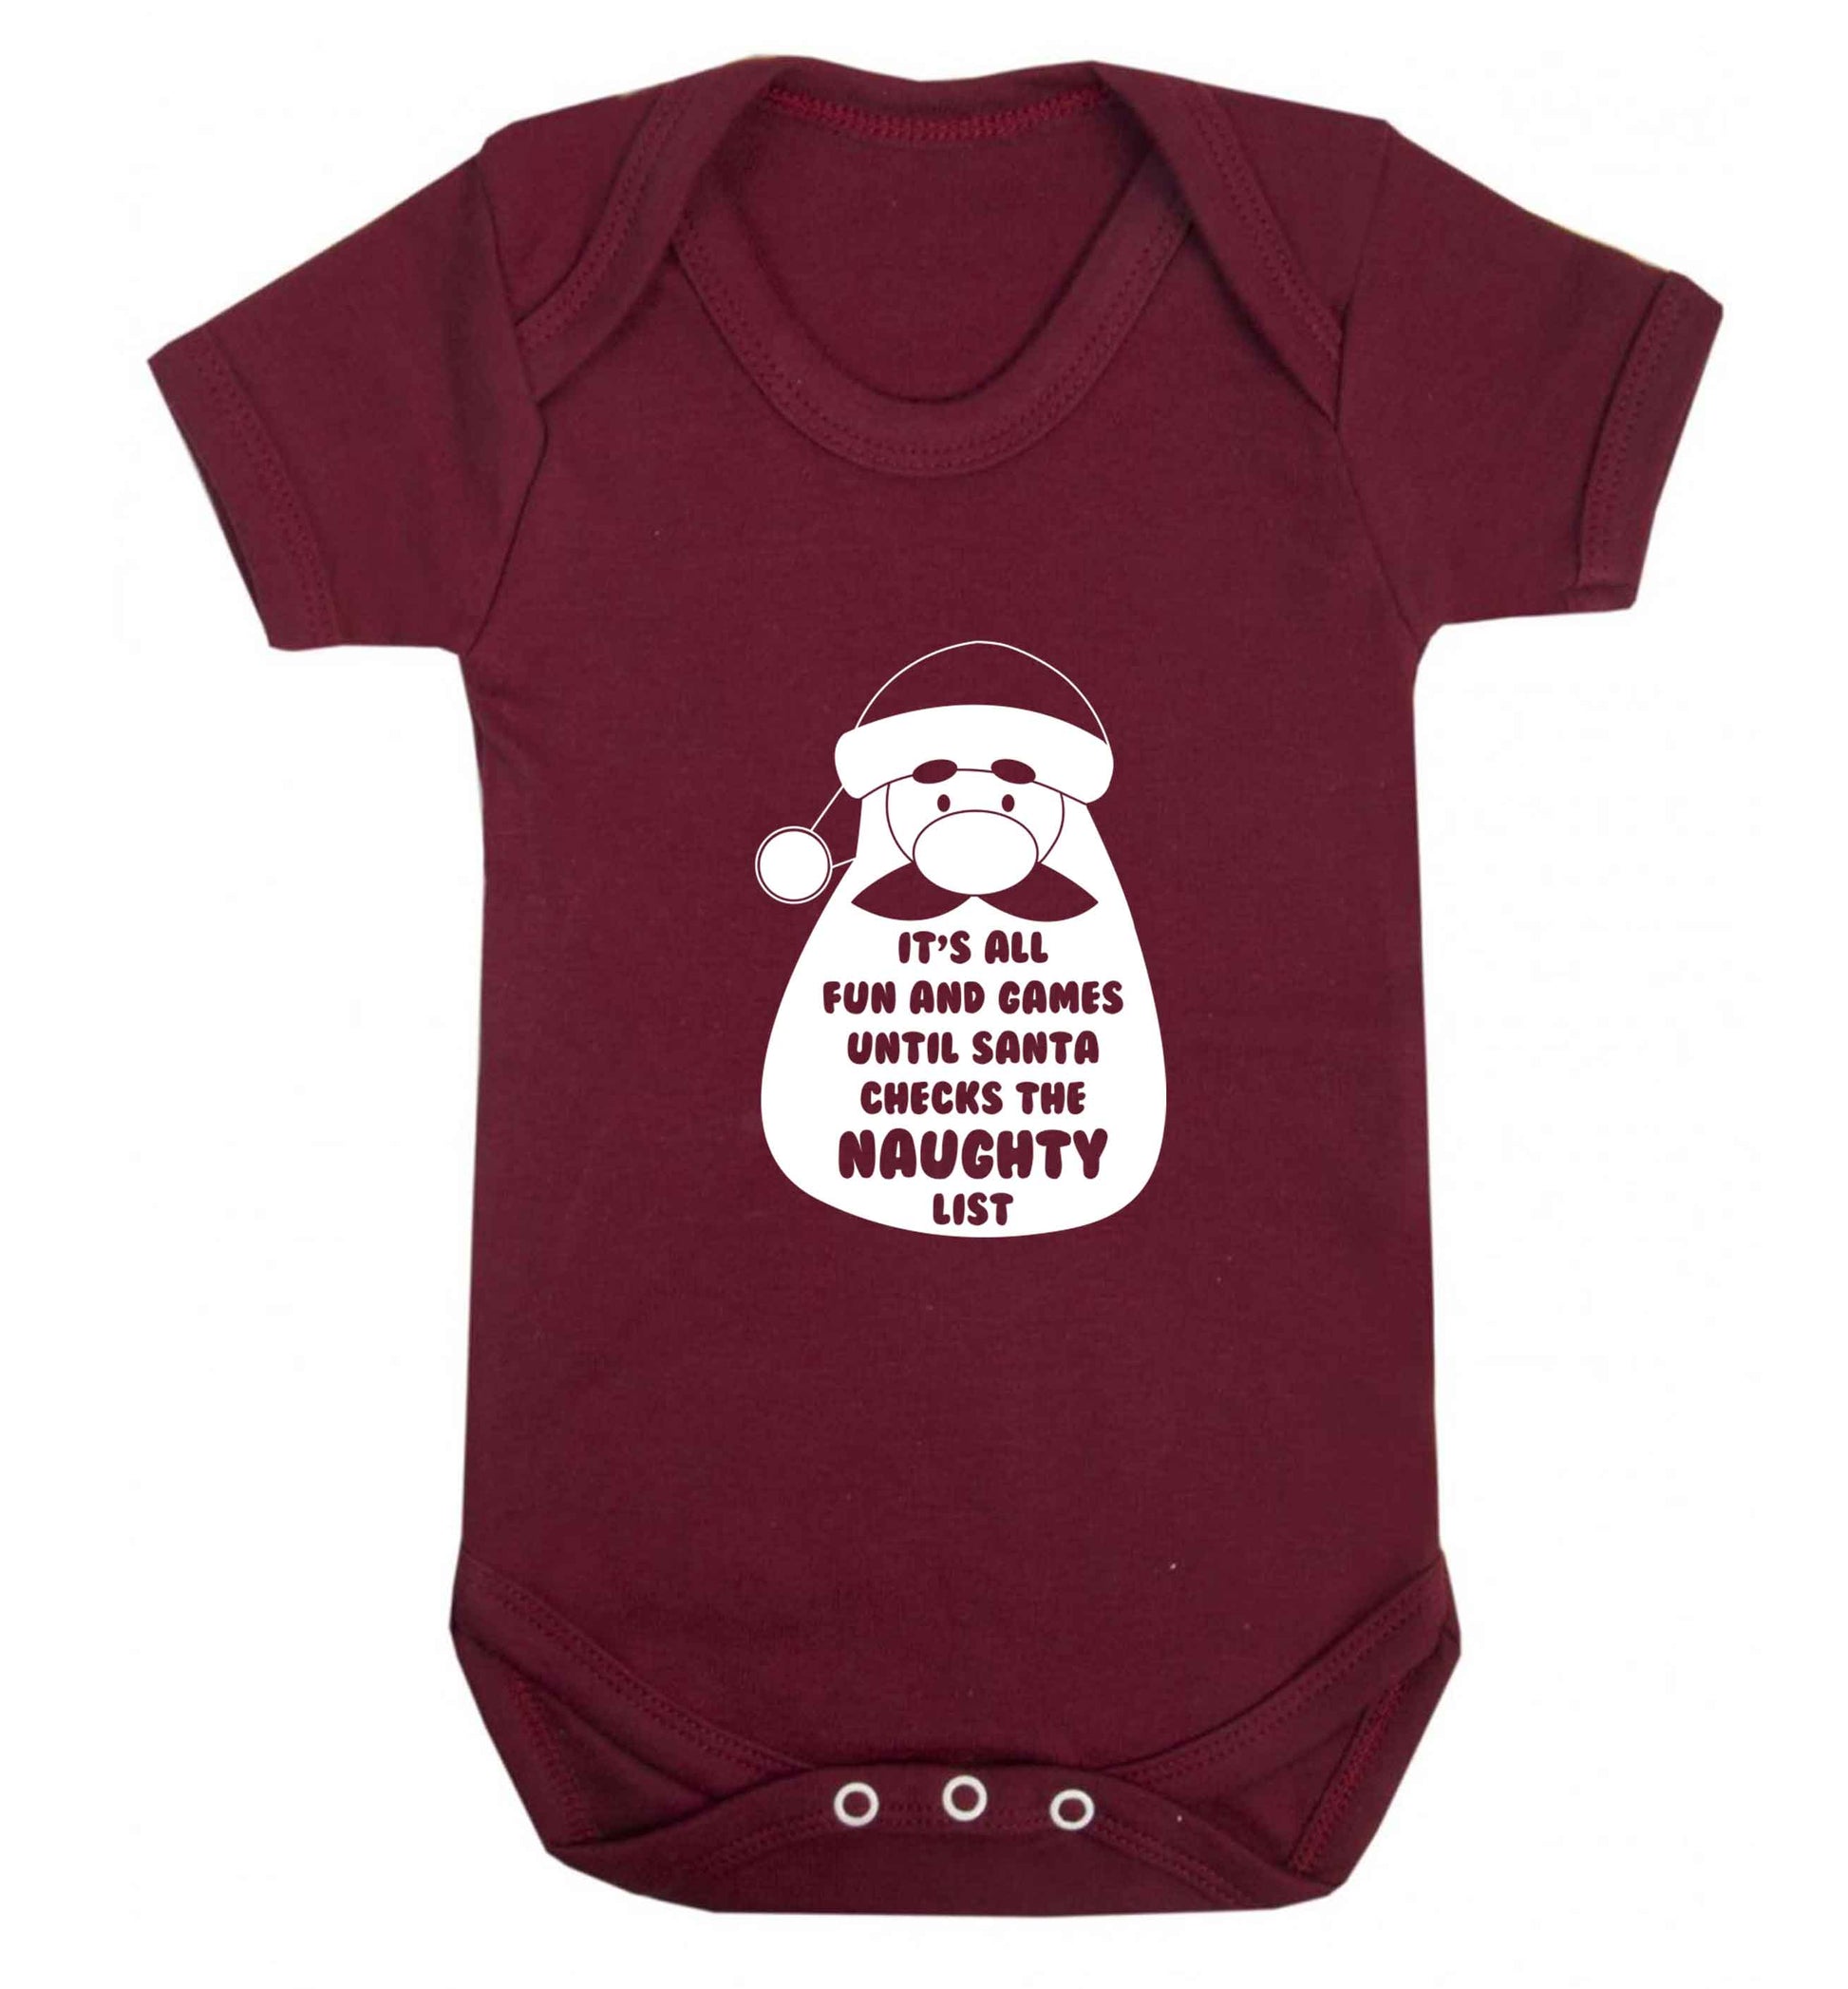 It's all fun and games until Santa checks the naughty list baby vest maroon 18-24 months